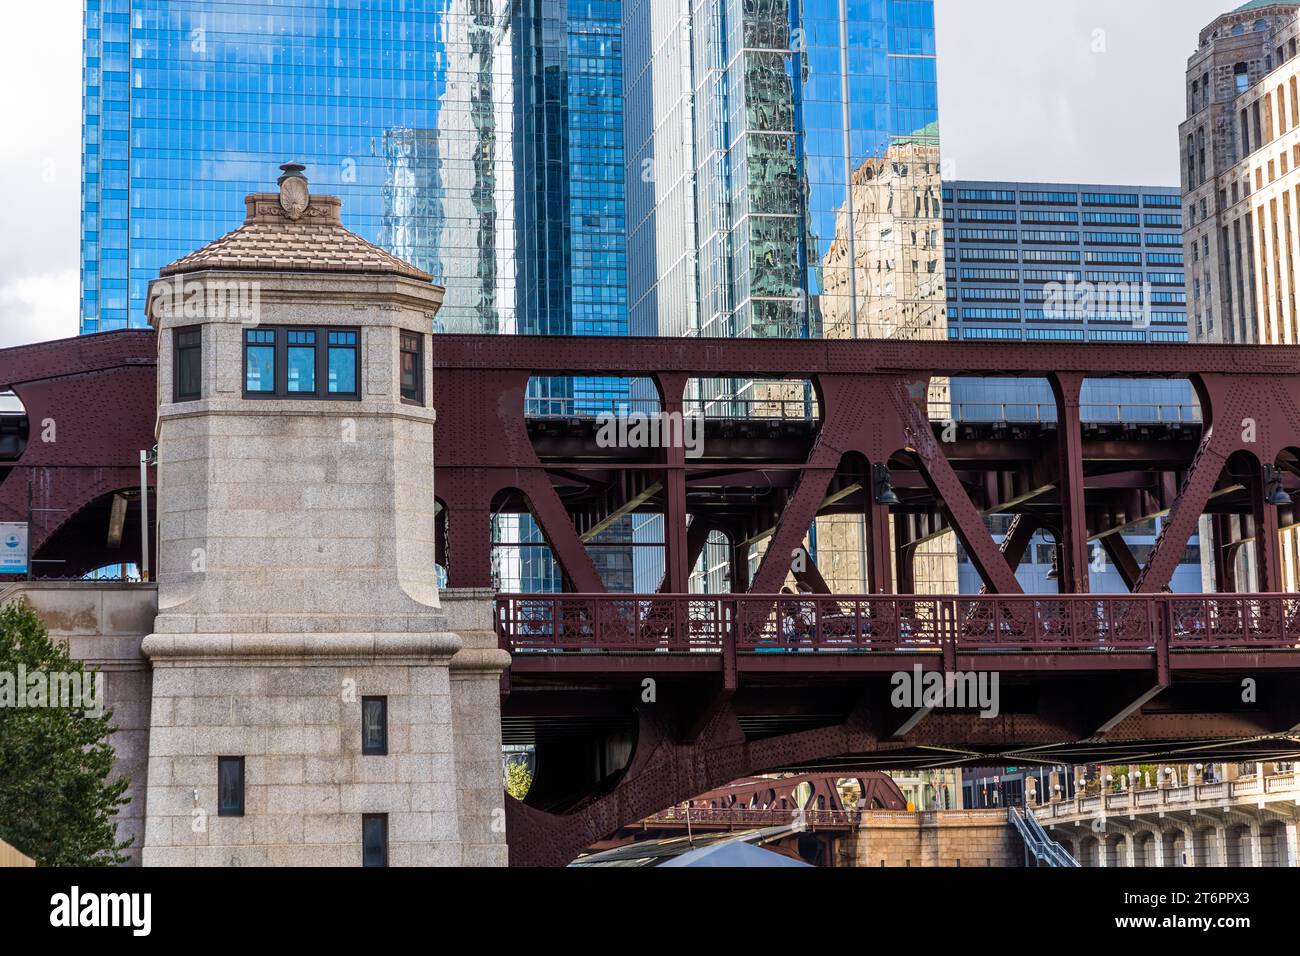 The bridges over the Chicago River are raised when necessary to allow larger ships to pass. The bridge keepers work in the historic bridge houses of Chicago, United States Stock Photo